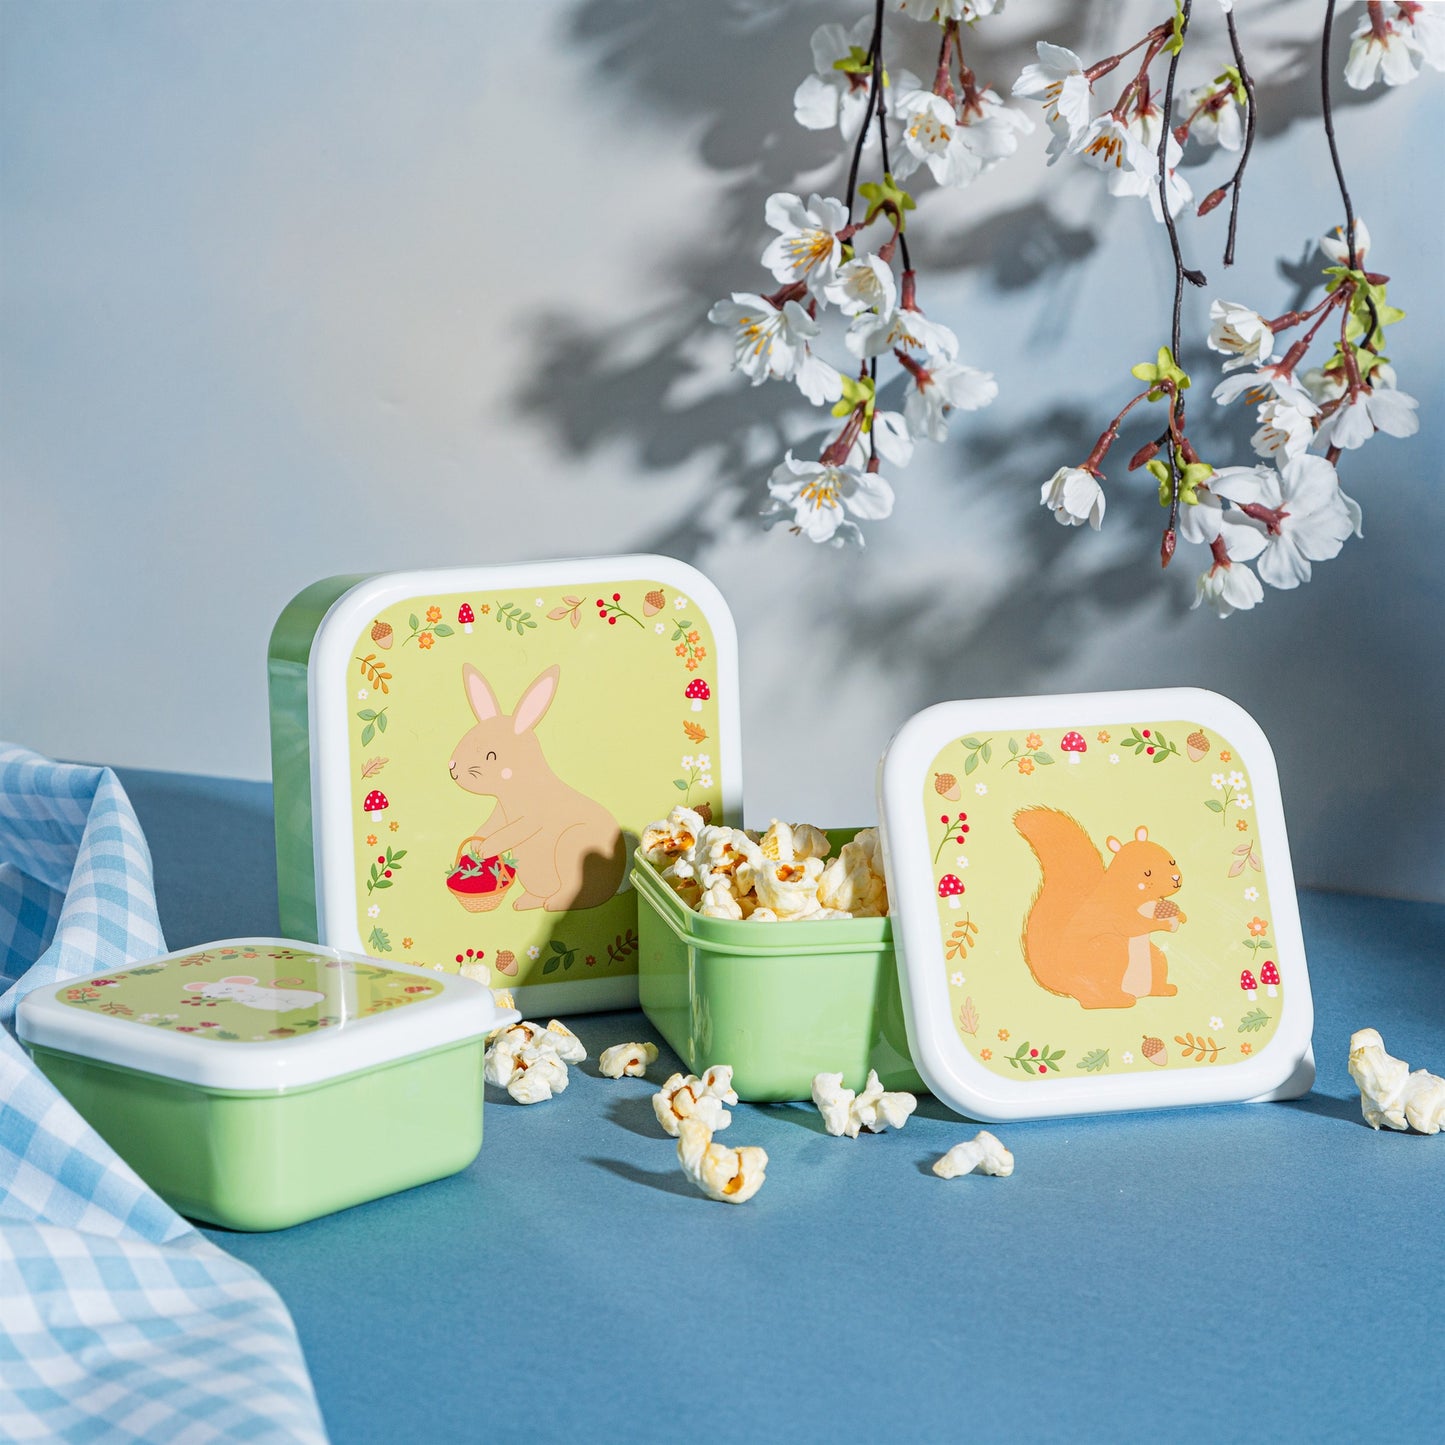 Garden Friends Lunch Boxes - Set Of 3